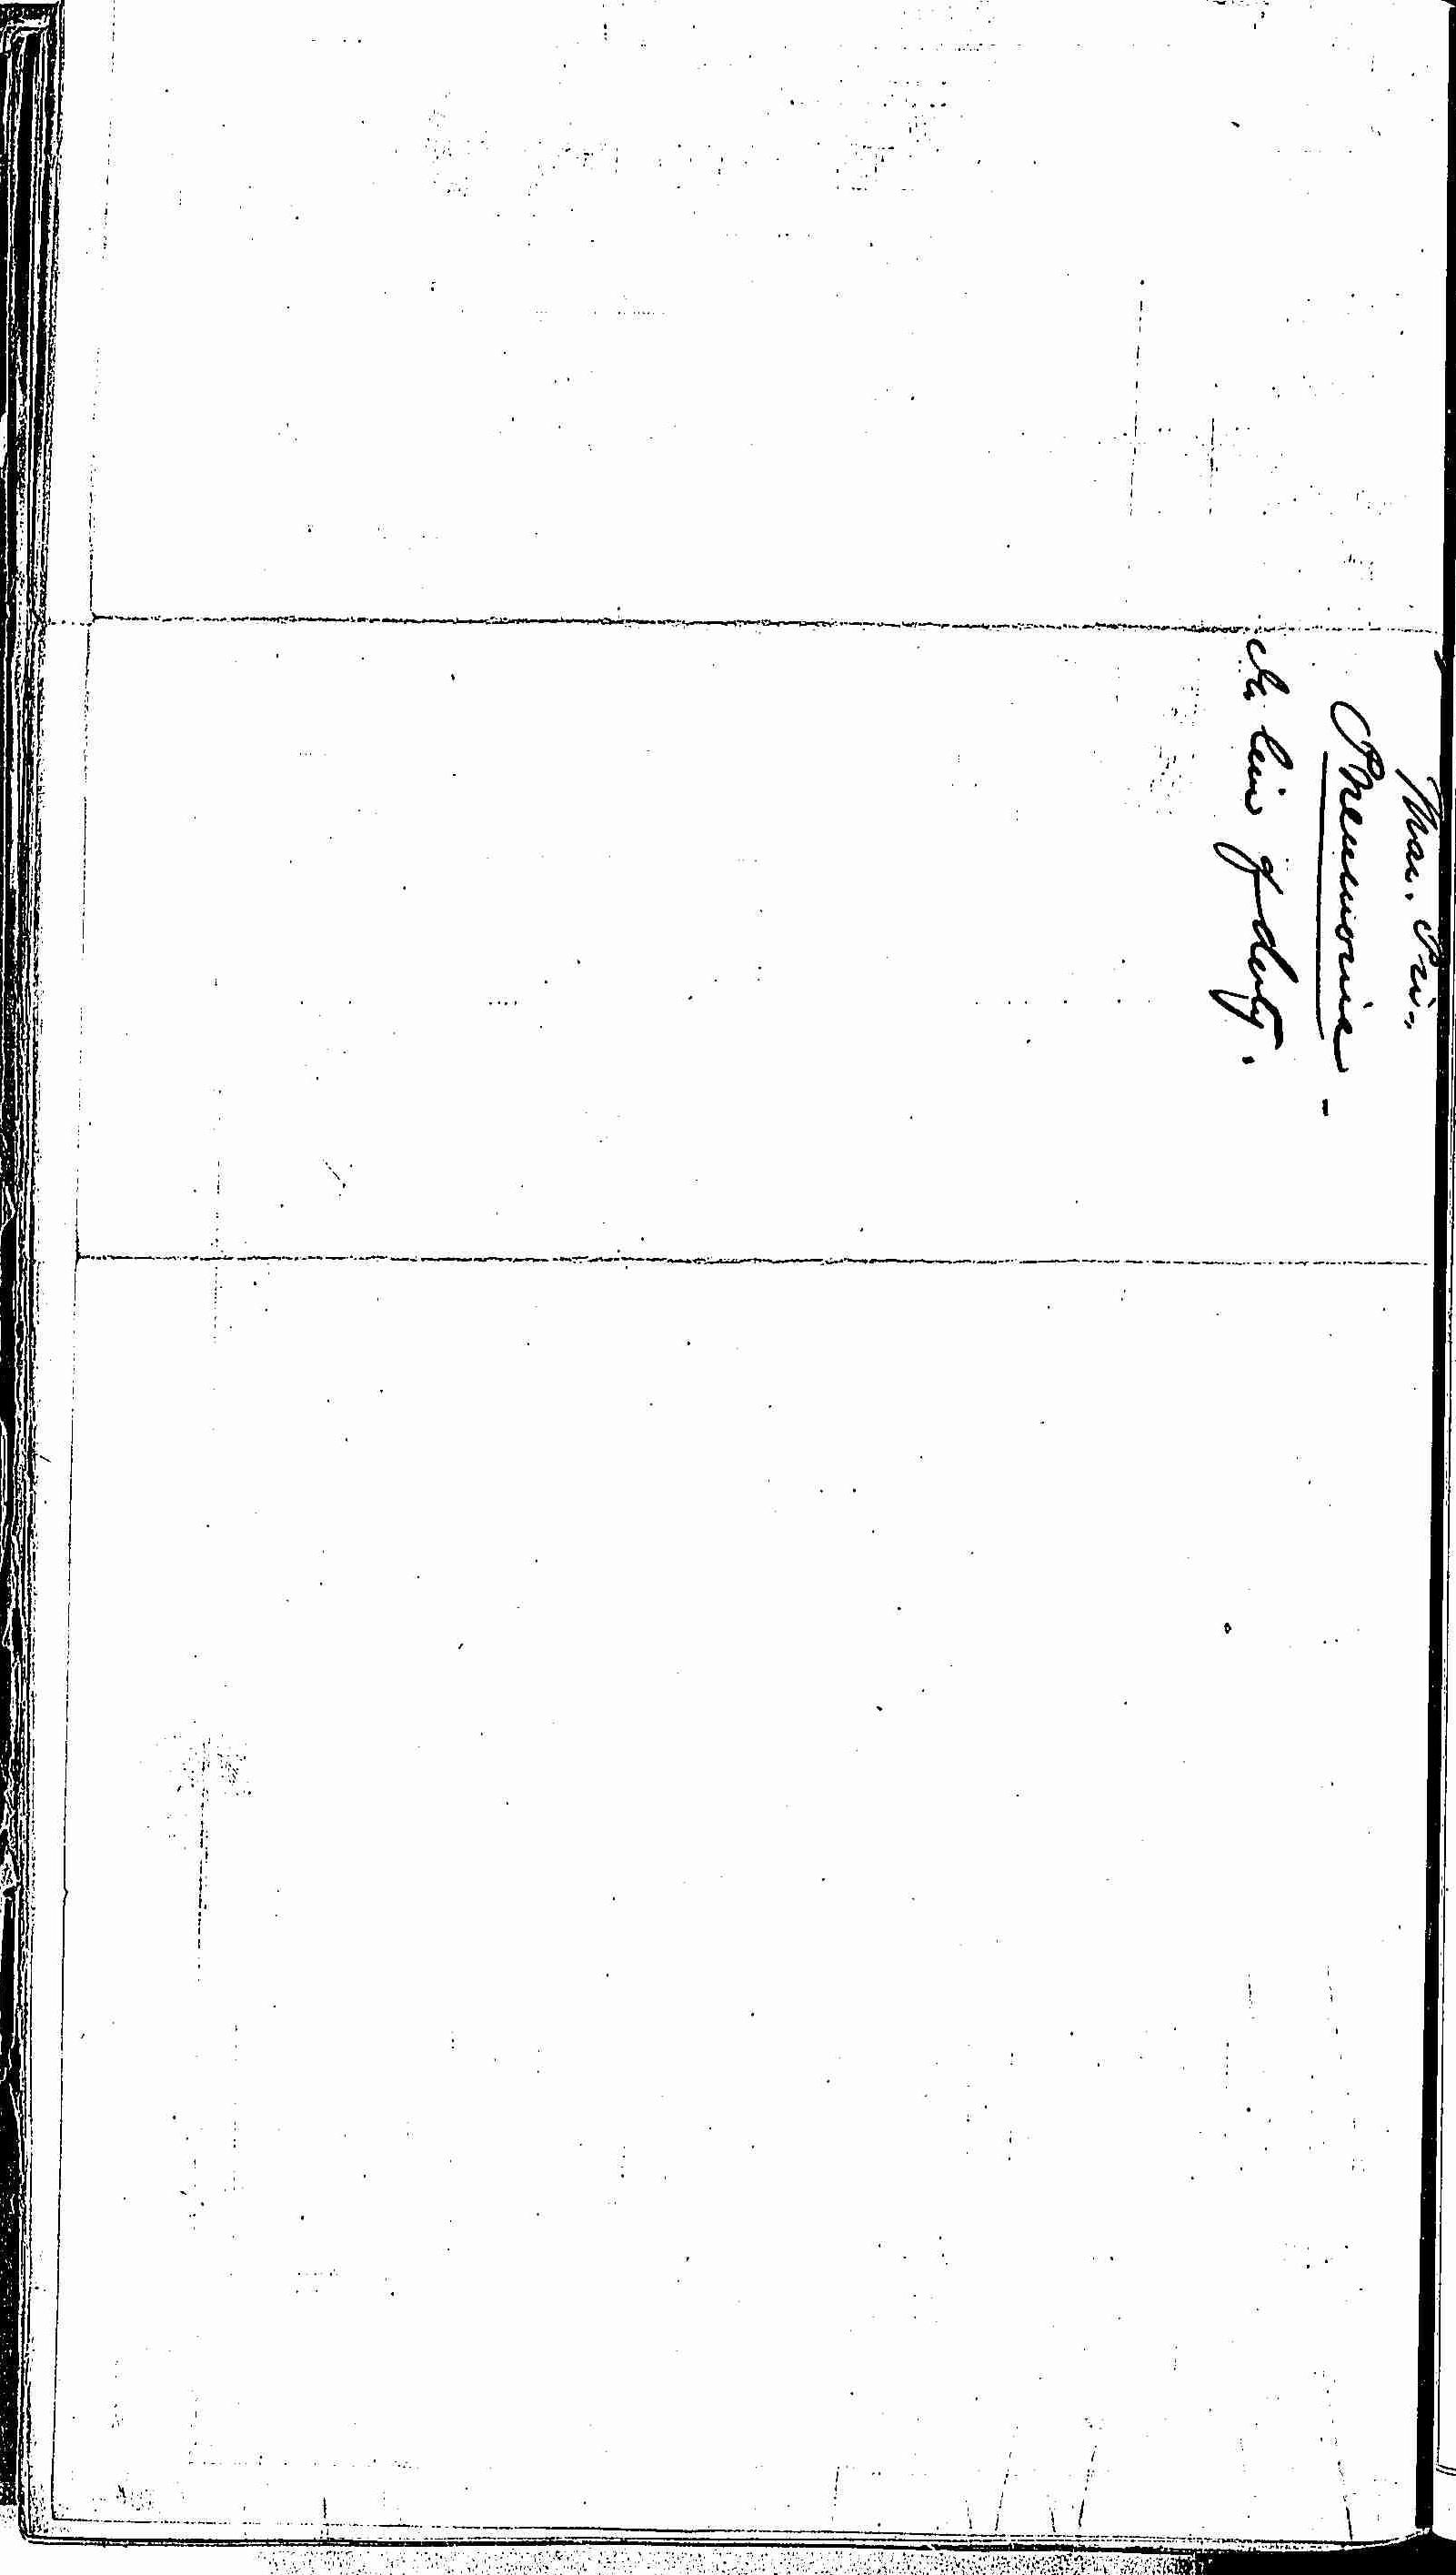 Entry for John Moran (page 2 of 2) in the log Hospital Tickets and Case Papers - Naval Hospital - Washington, D.C. - 1866-68